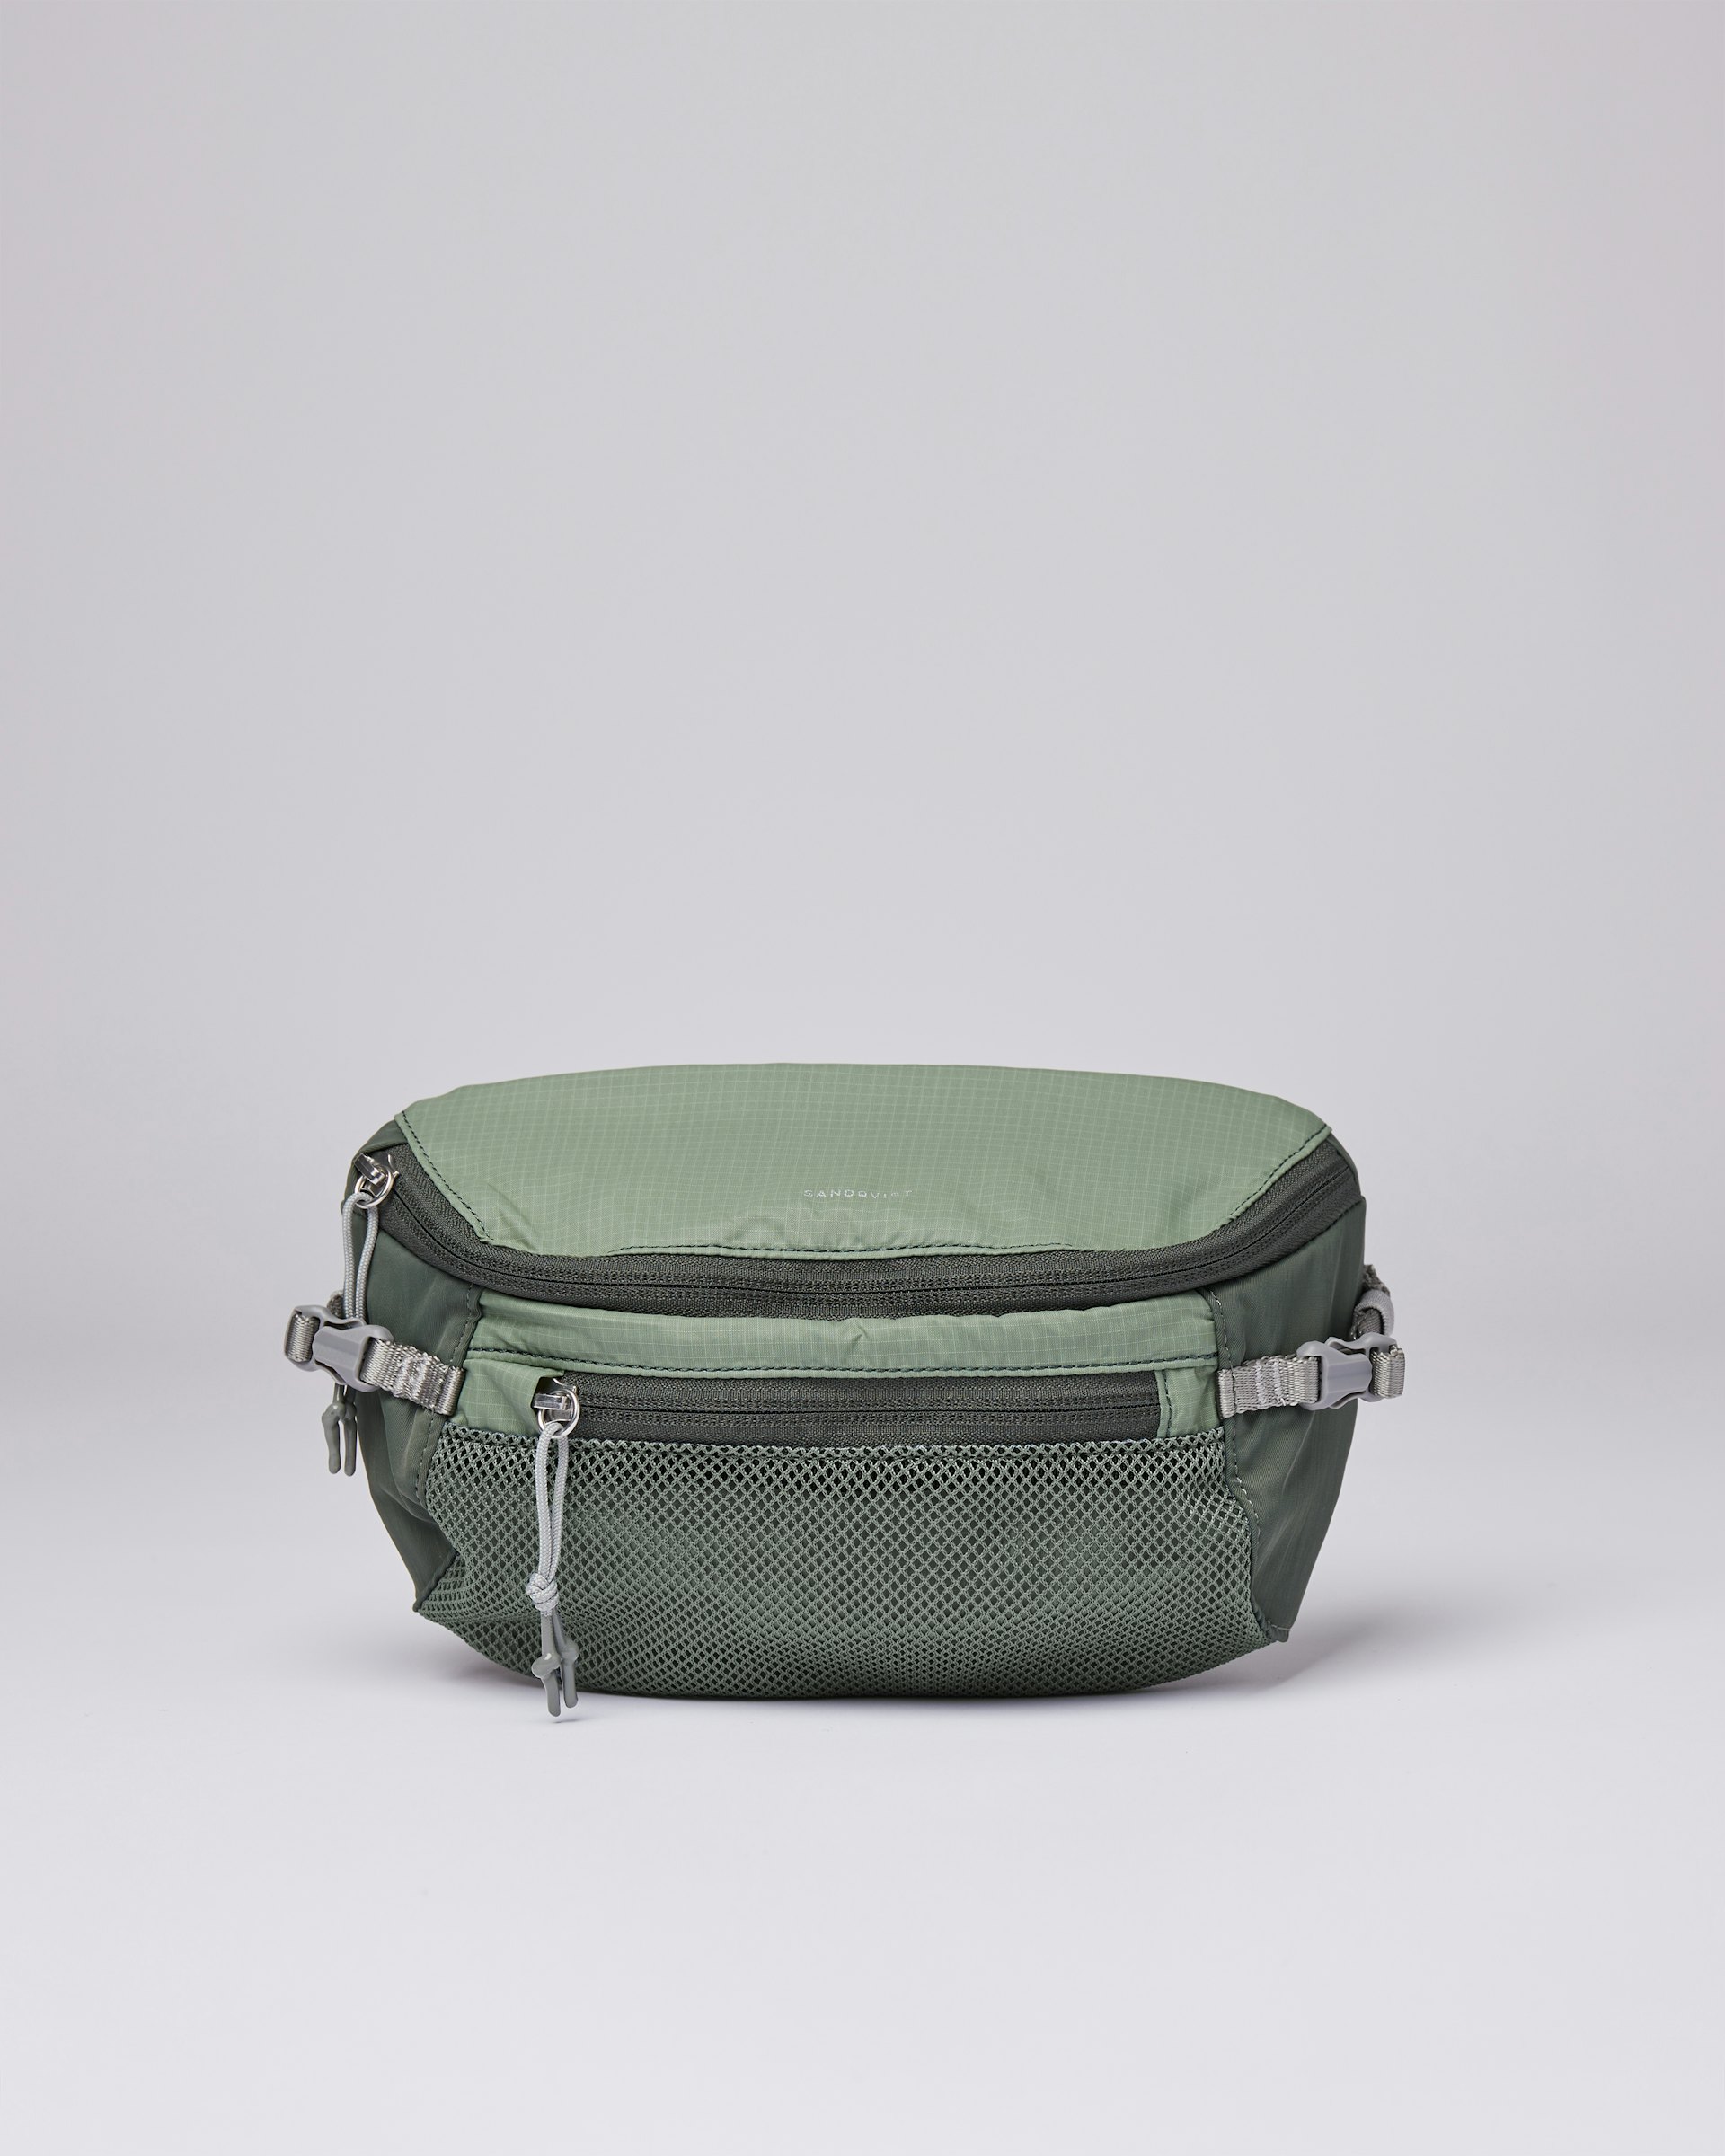 Lo belongs to the category Bum bags and is in color lichen green